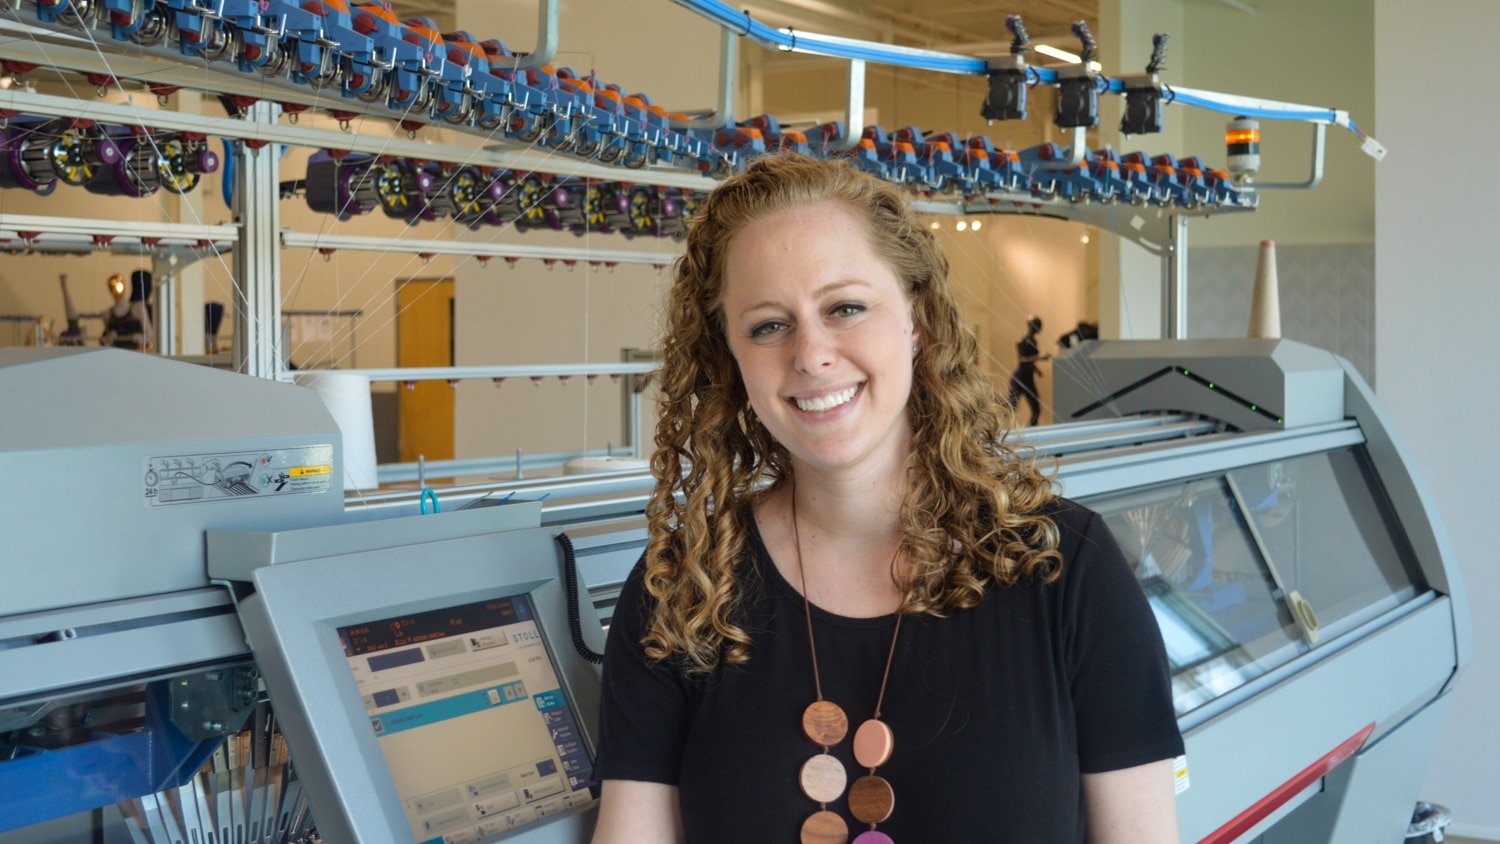 Zoe Newman stands in front of a knitting machine and smiles at the camera.